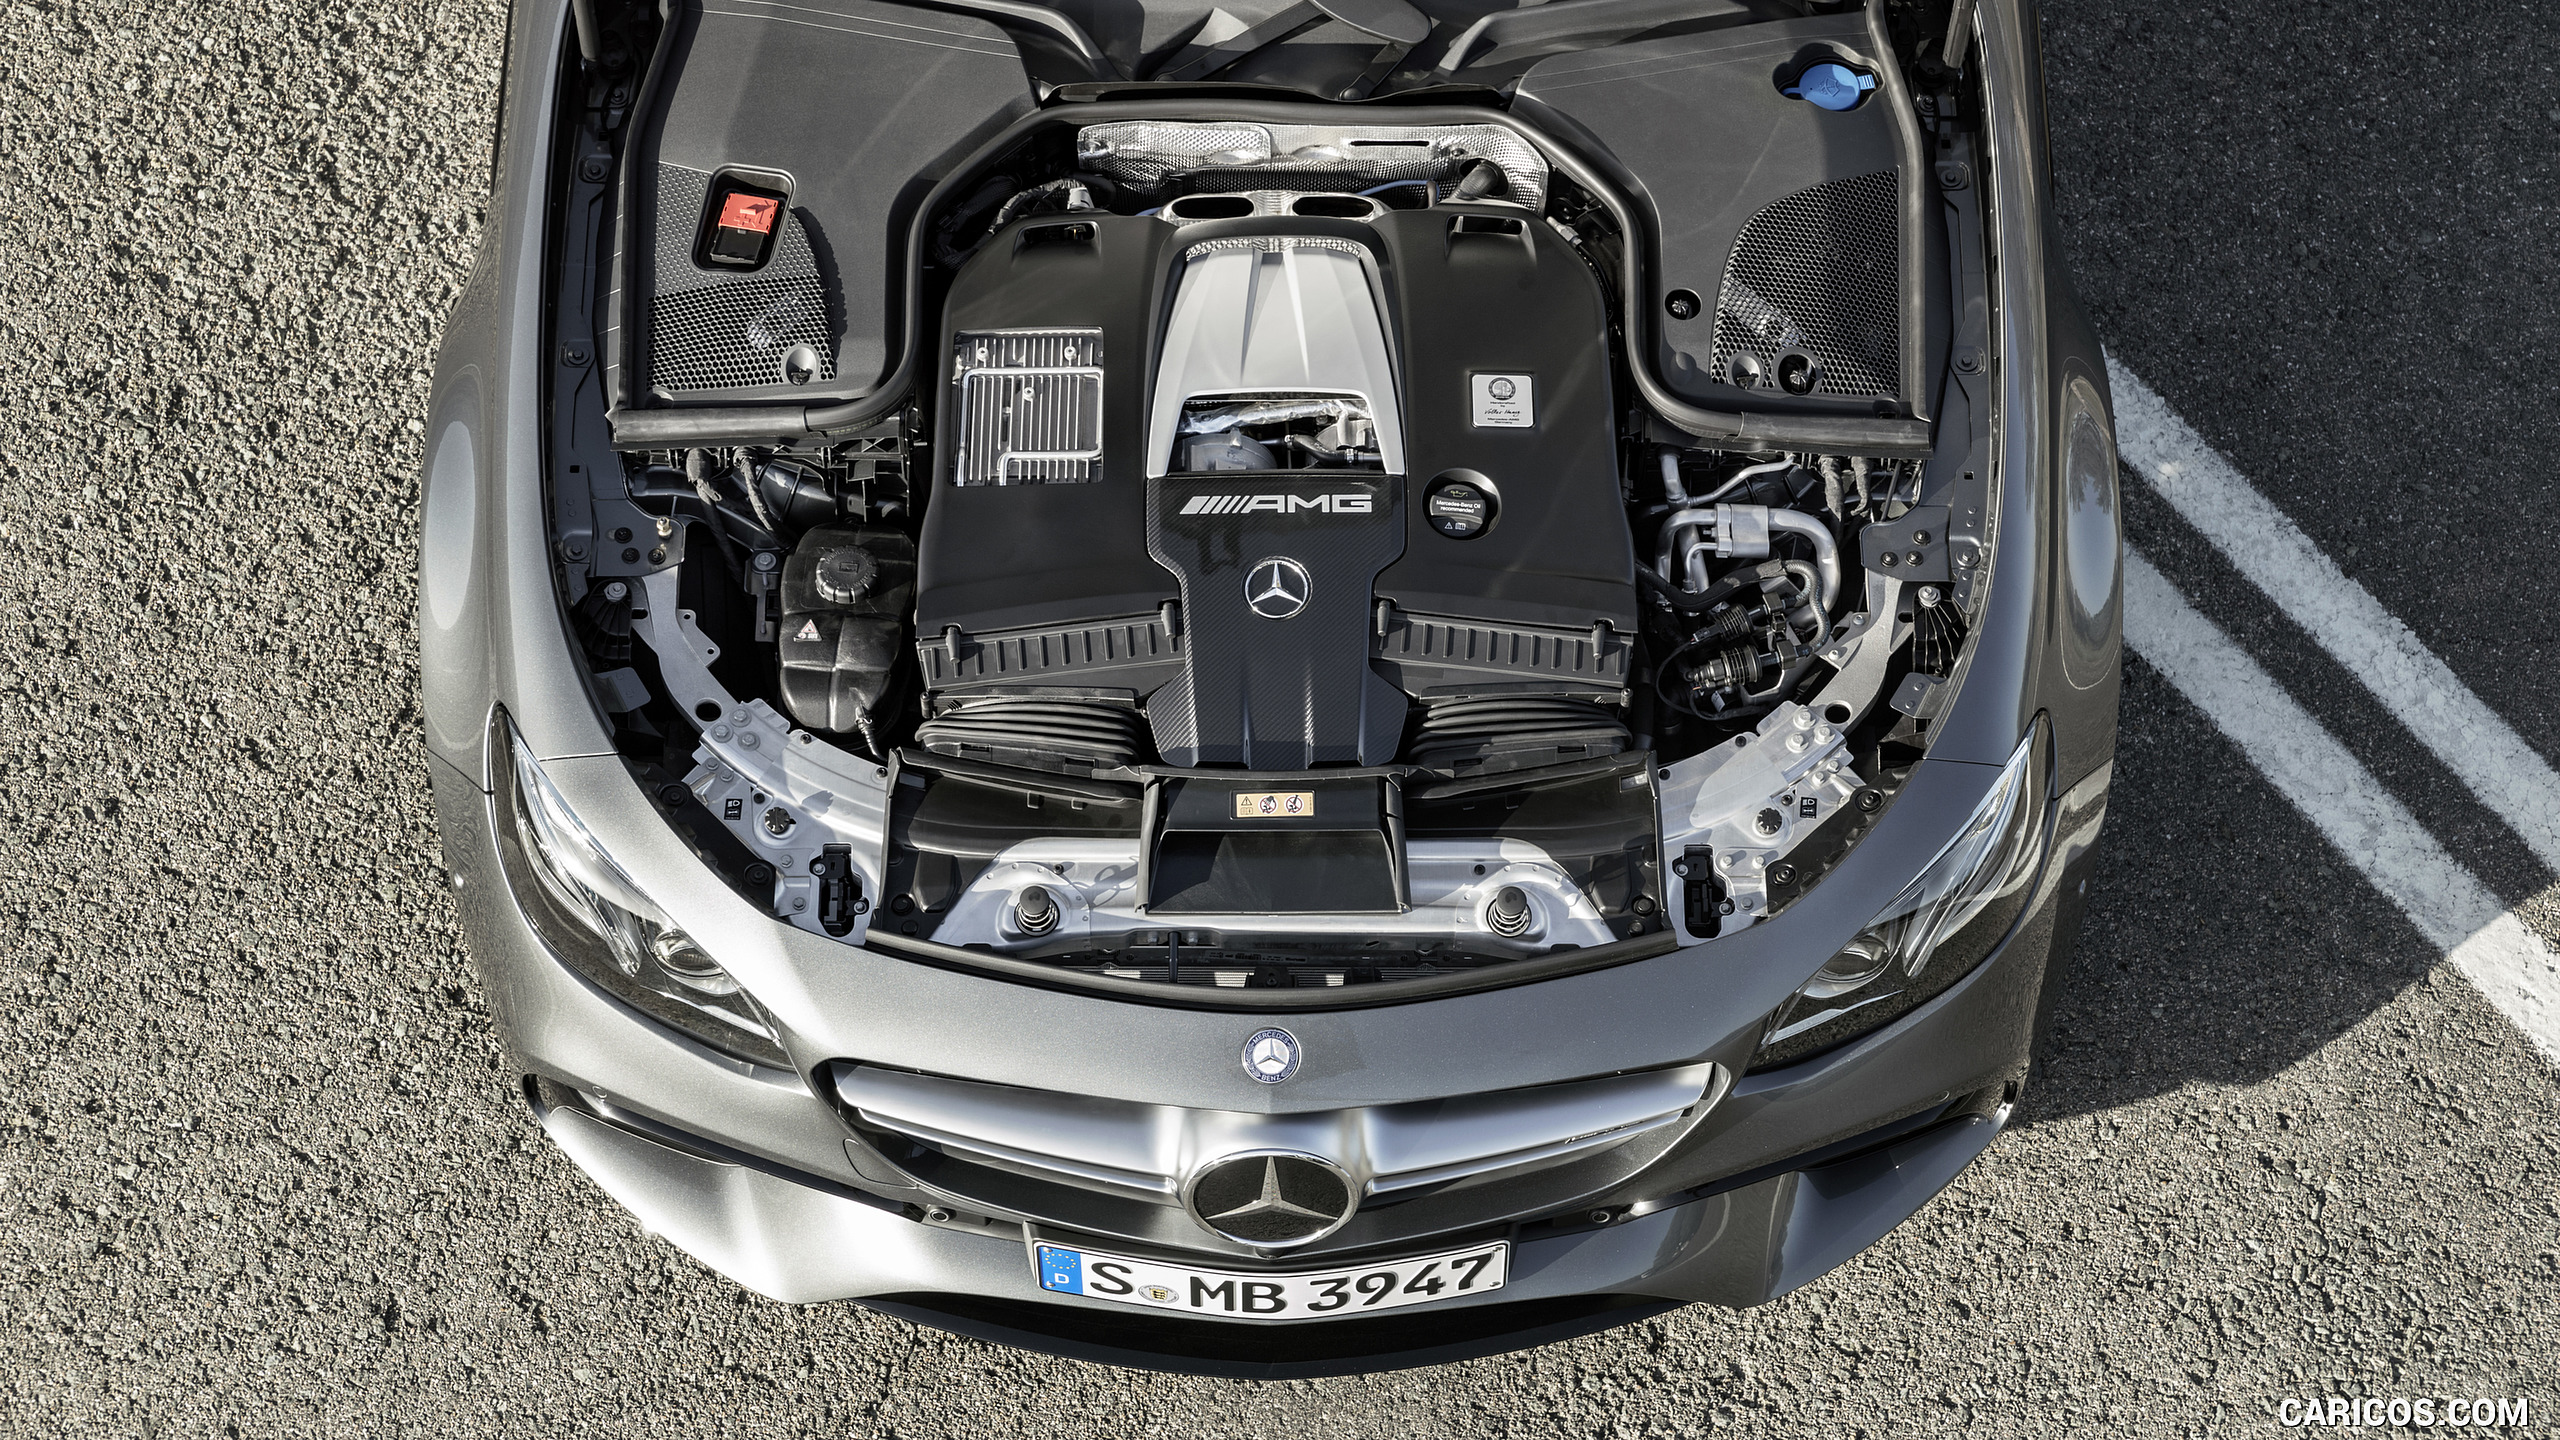 2018 Mercedes-AMG E63 S 4MATIC+ - Engine, #31 of 323